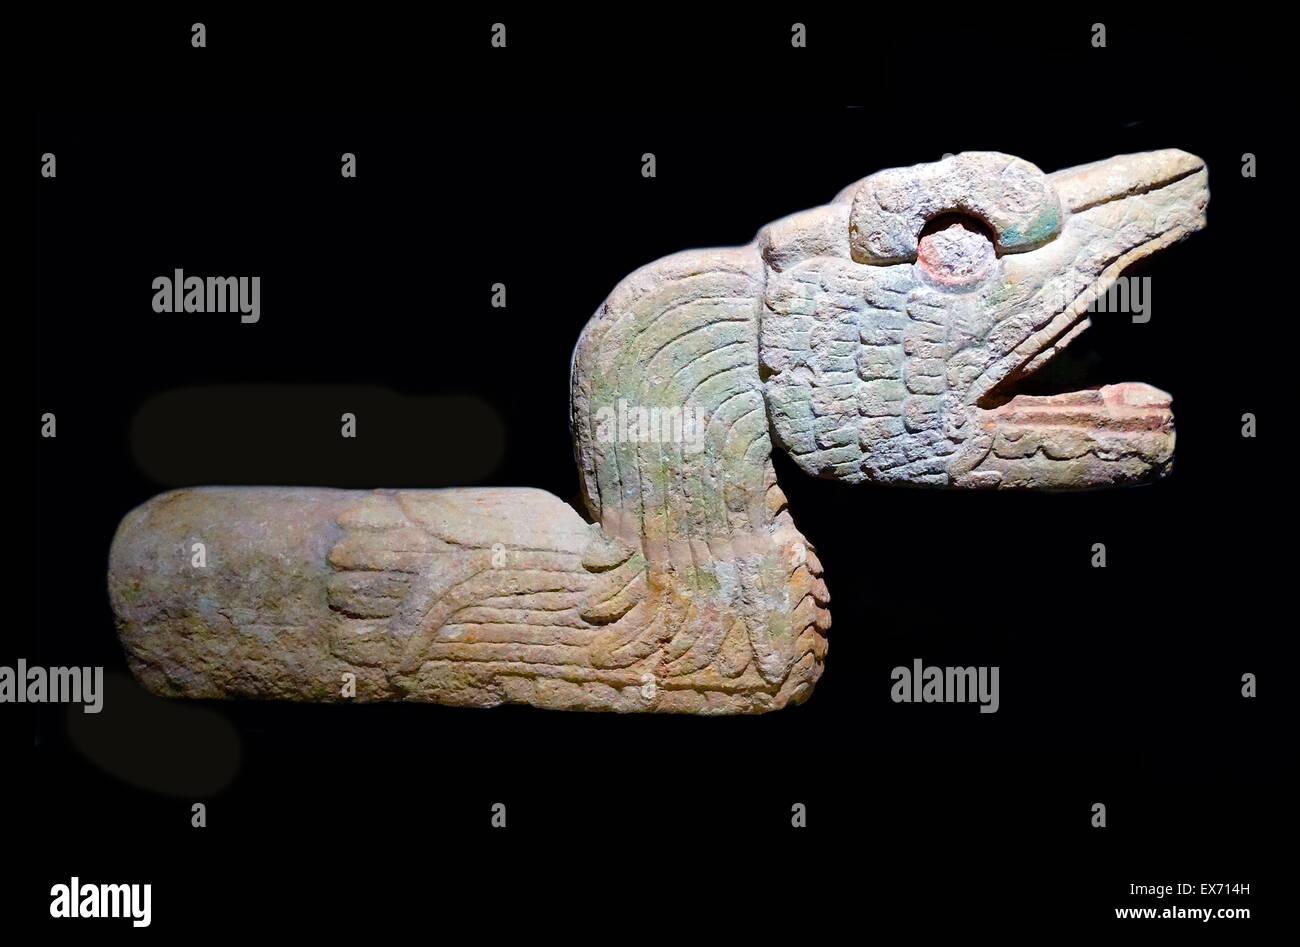 post-classical Mayan Sculpture of a plumed serpent (quetzal) from Chichen Itza, Yucatan, Mexico 900-1250 AD Stock Photo